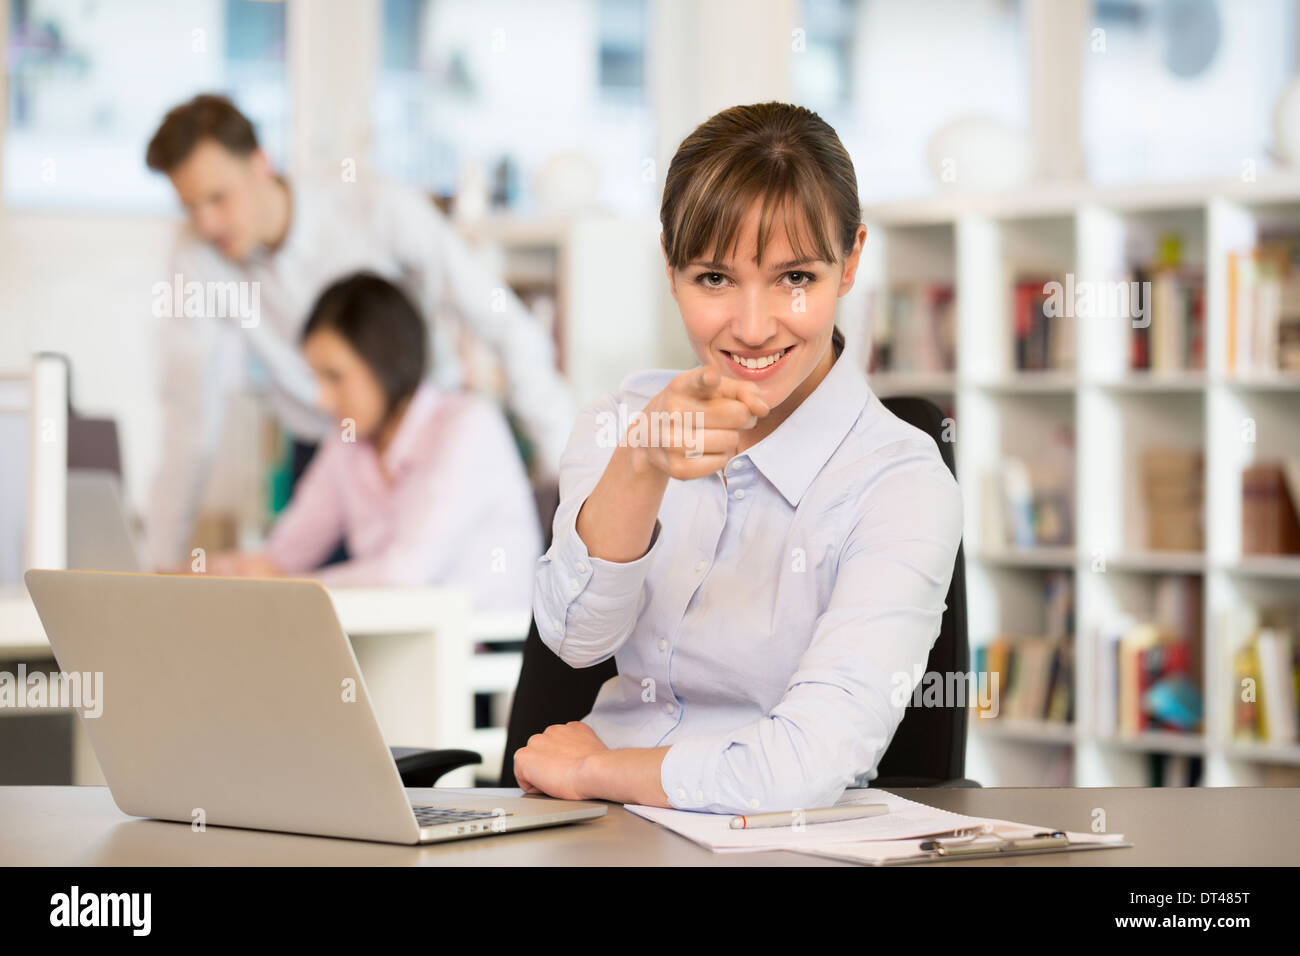 Happy business woman desk smiling point finger computer Stock Photo